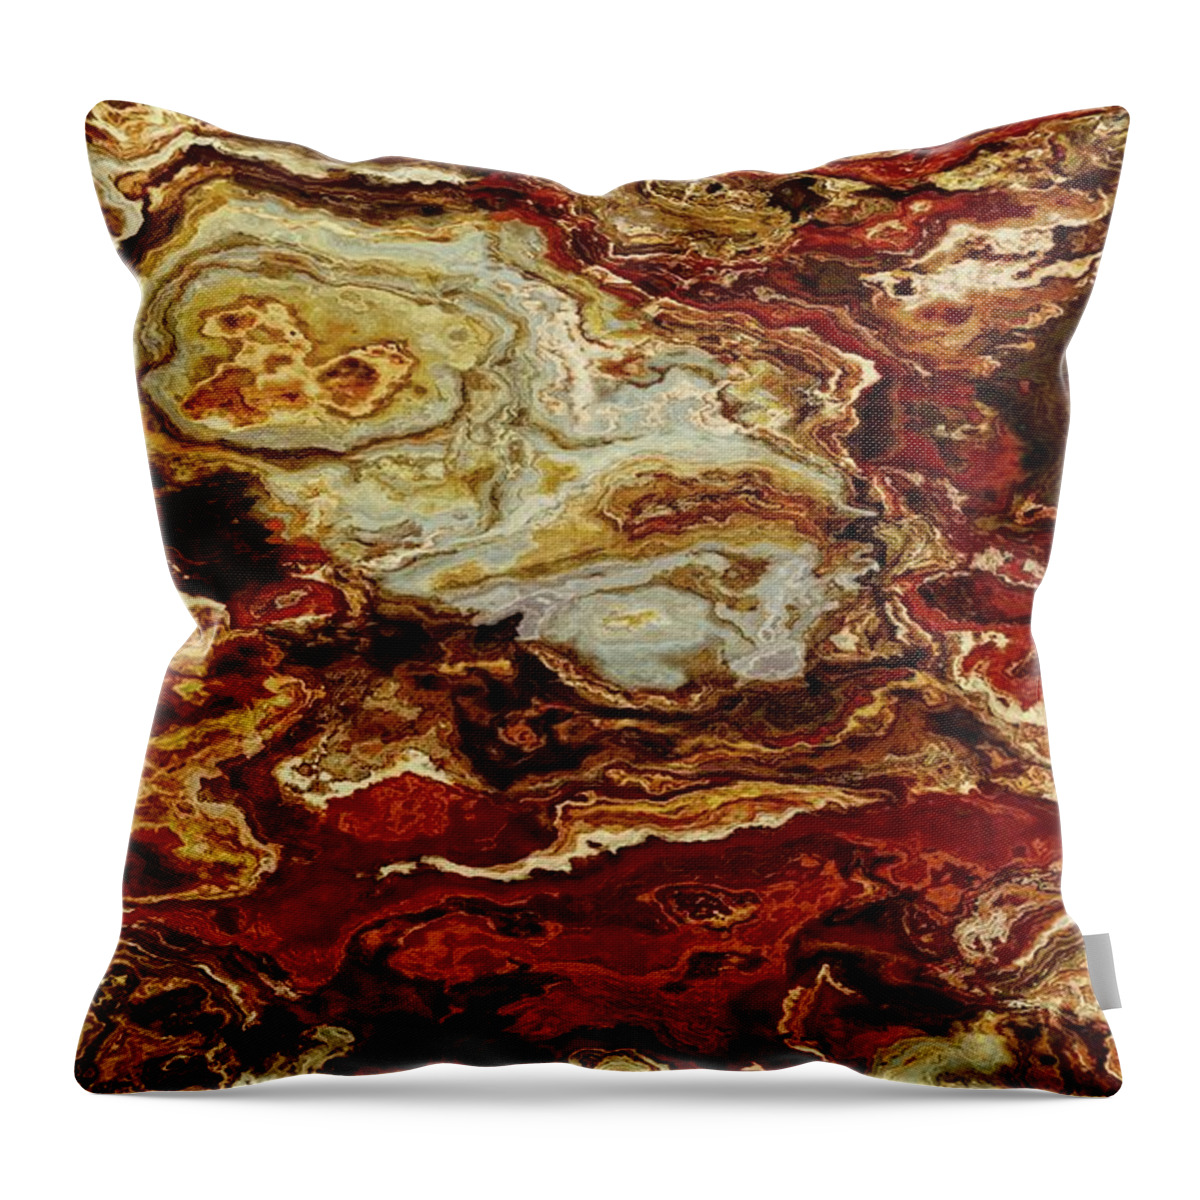 Blood Throw Pillow featuring the digital art The Sanguine Faithful by Matthew Lindley